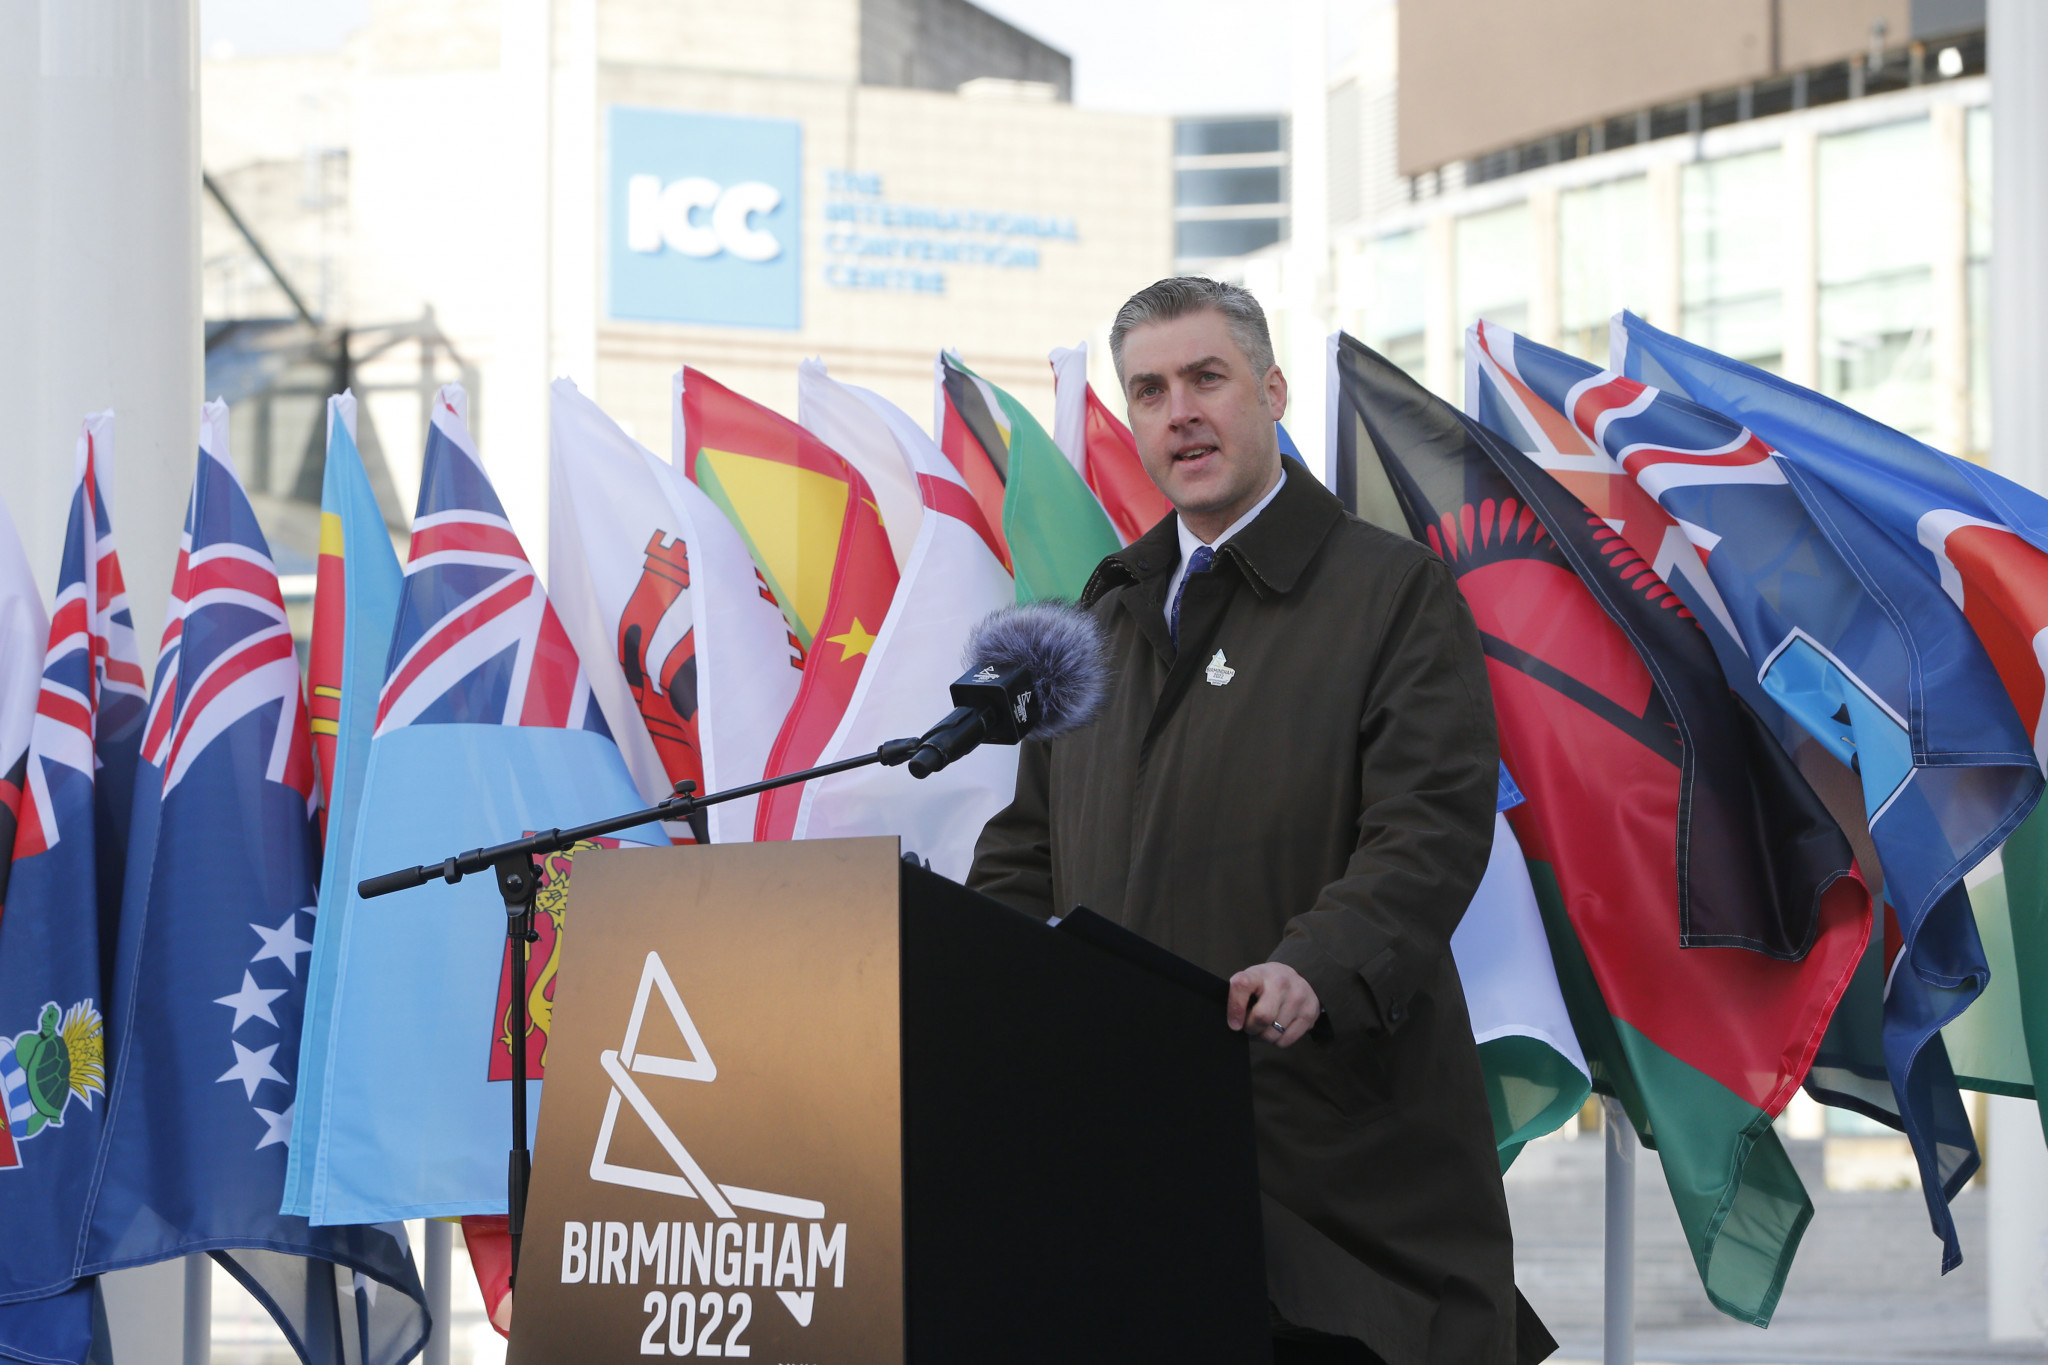 Birmingham 2022 chief executive Ian Reid said the presence of military personnel had given organisers "peace of mind" ©Getty Images